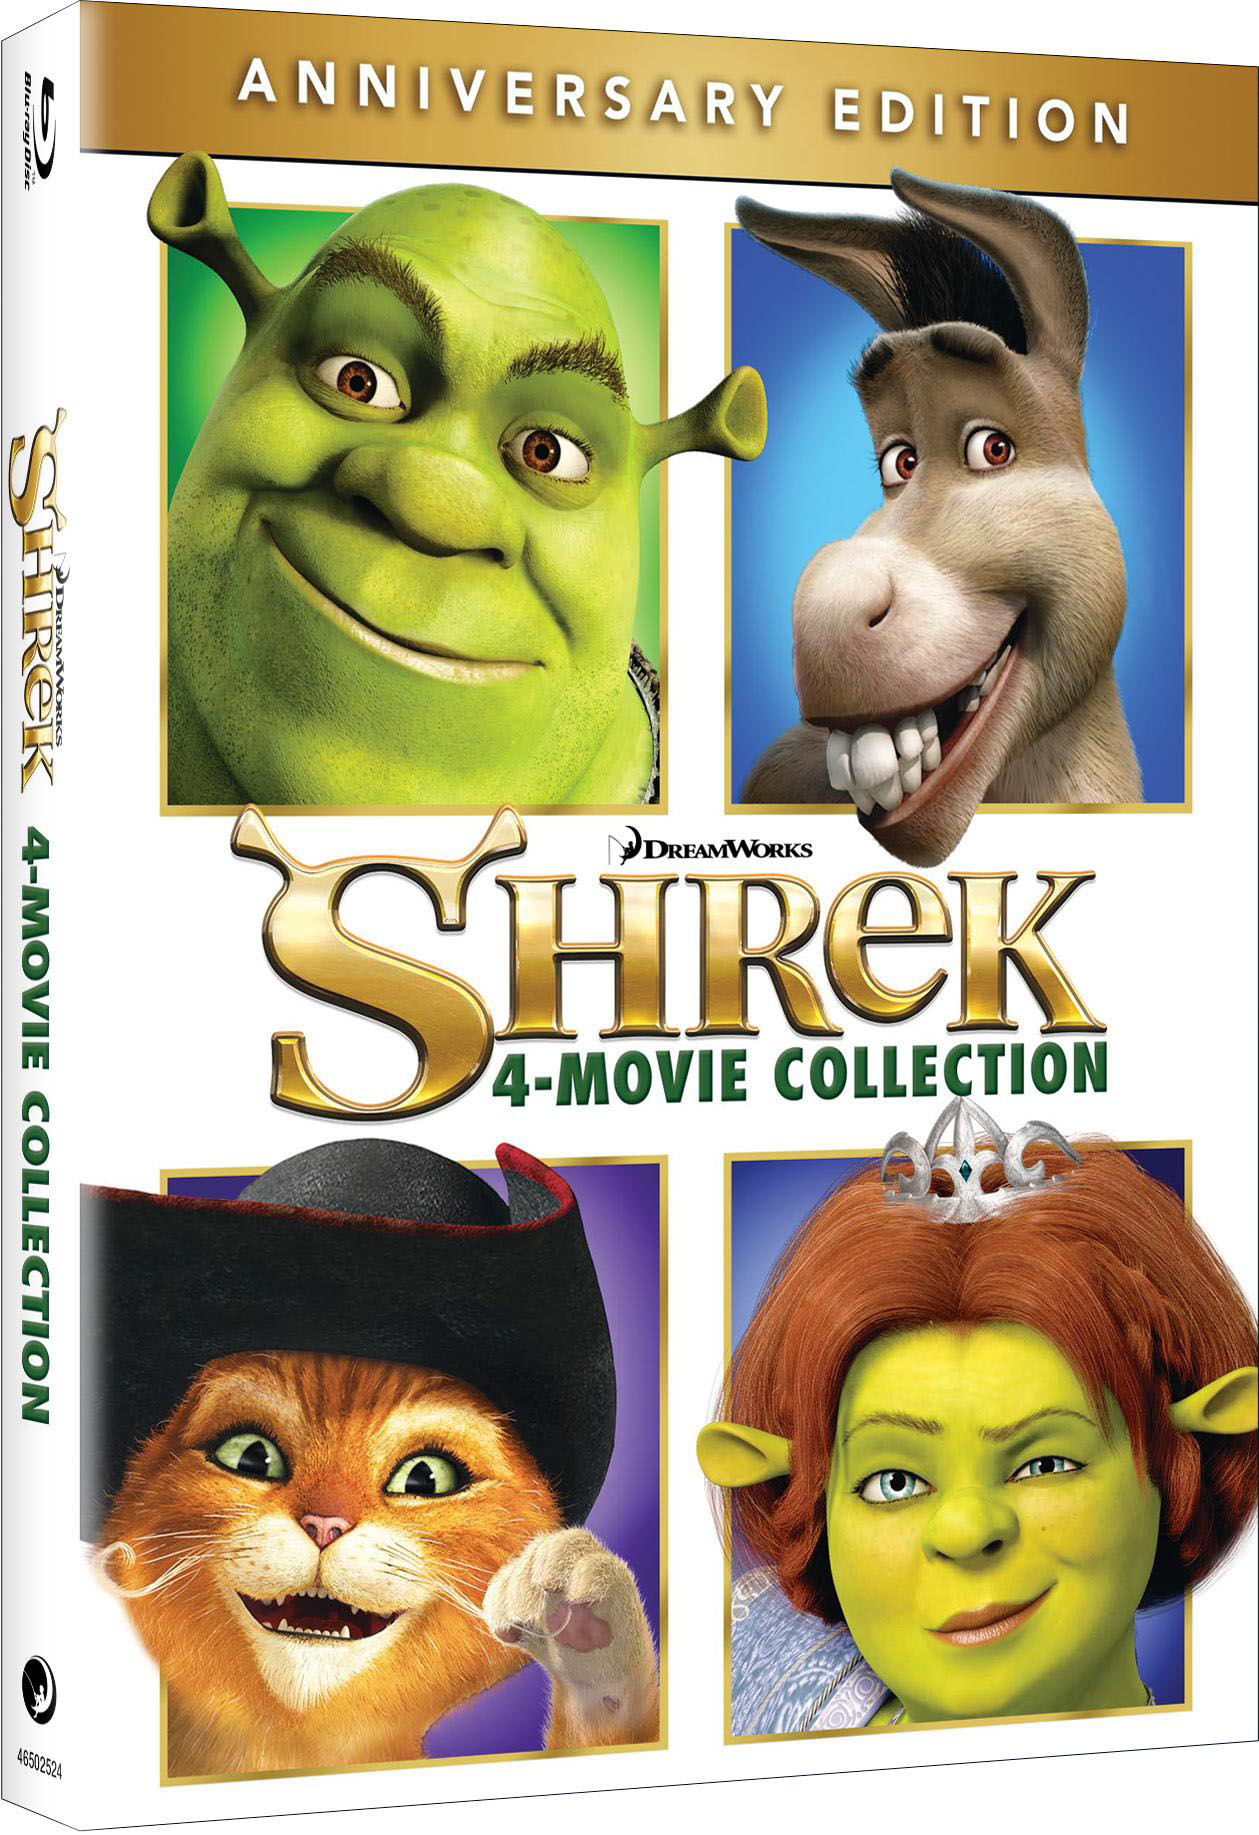 Shrek 4-Movie Collection (Blu-ray) - image 3 of 3